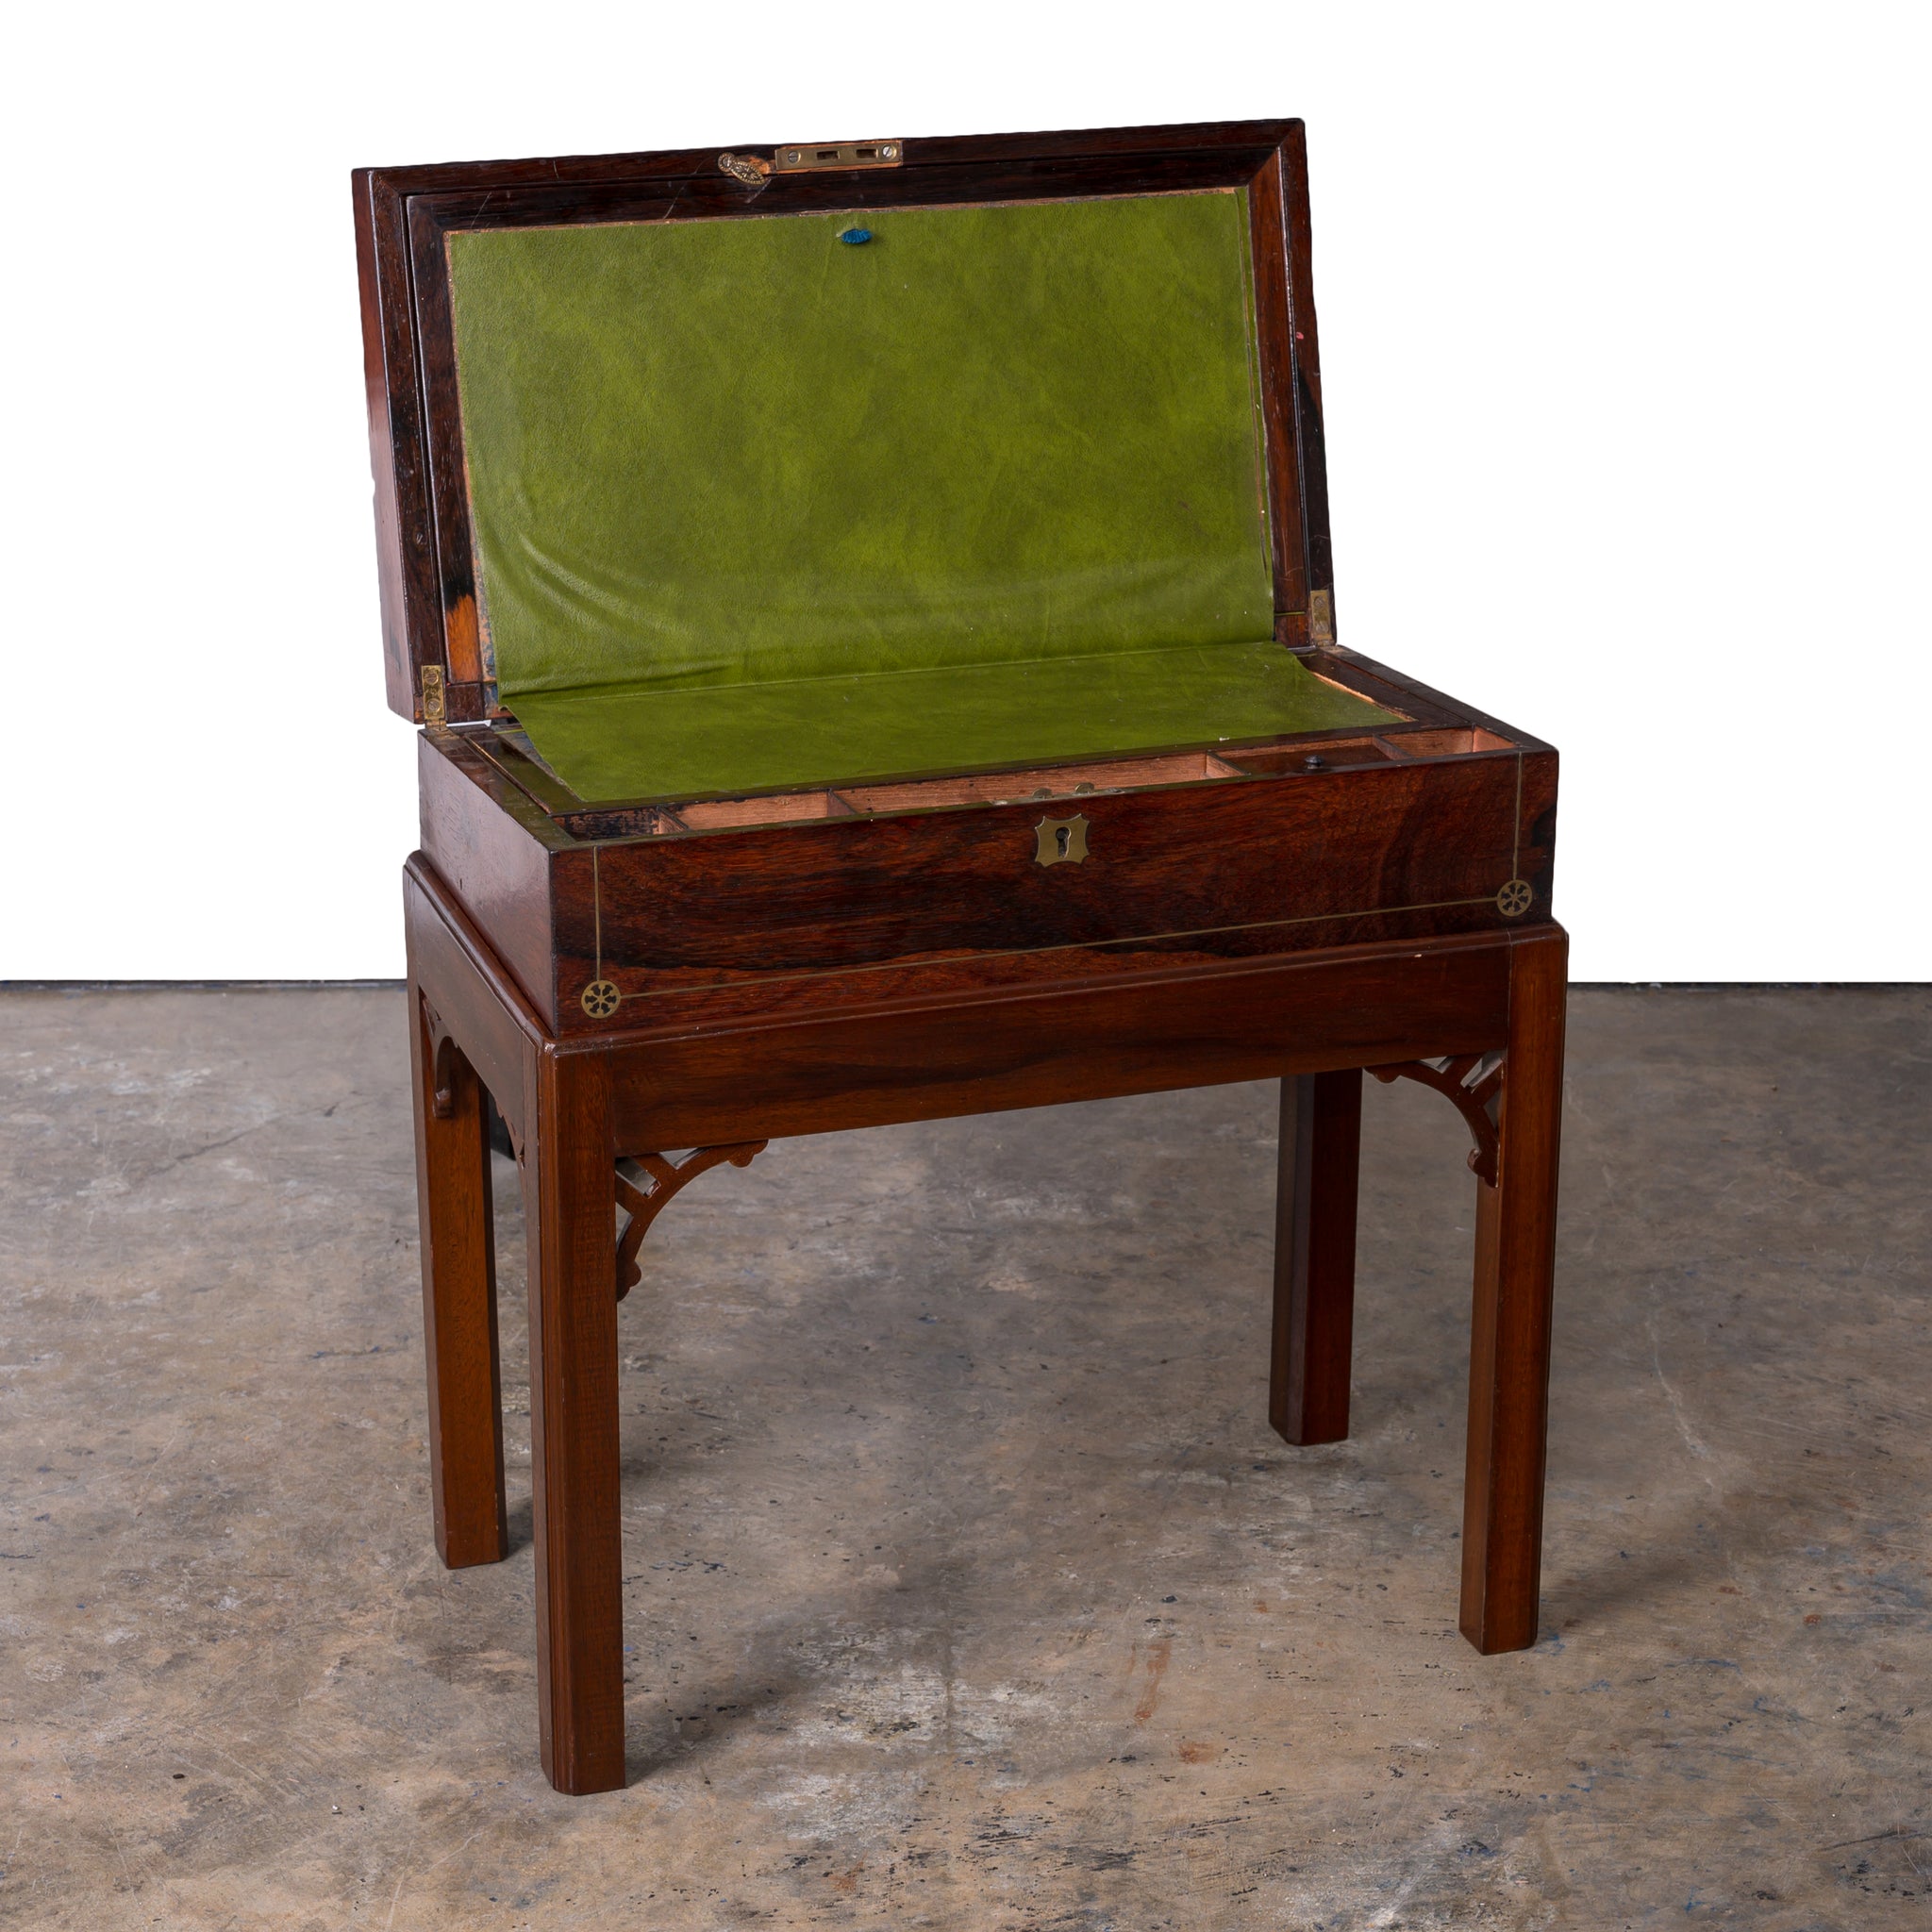 English Rosewood Lap Desk on Stand, 19th Century